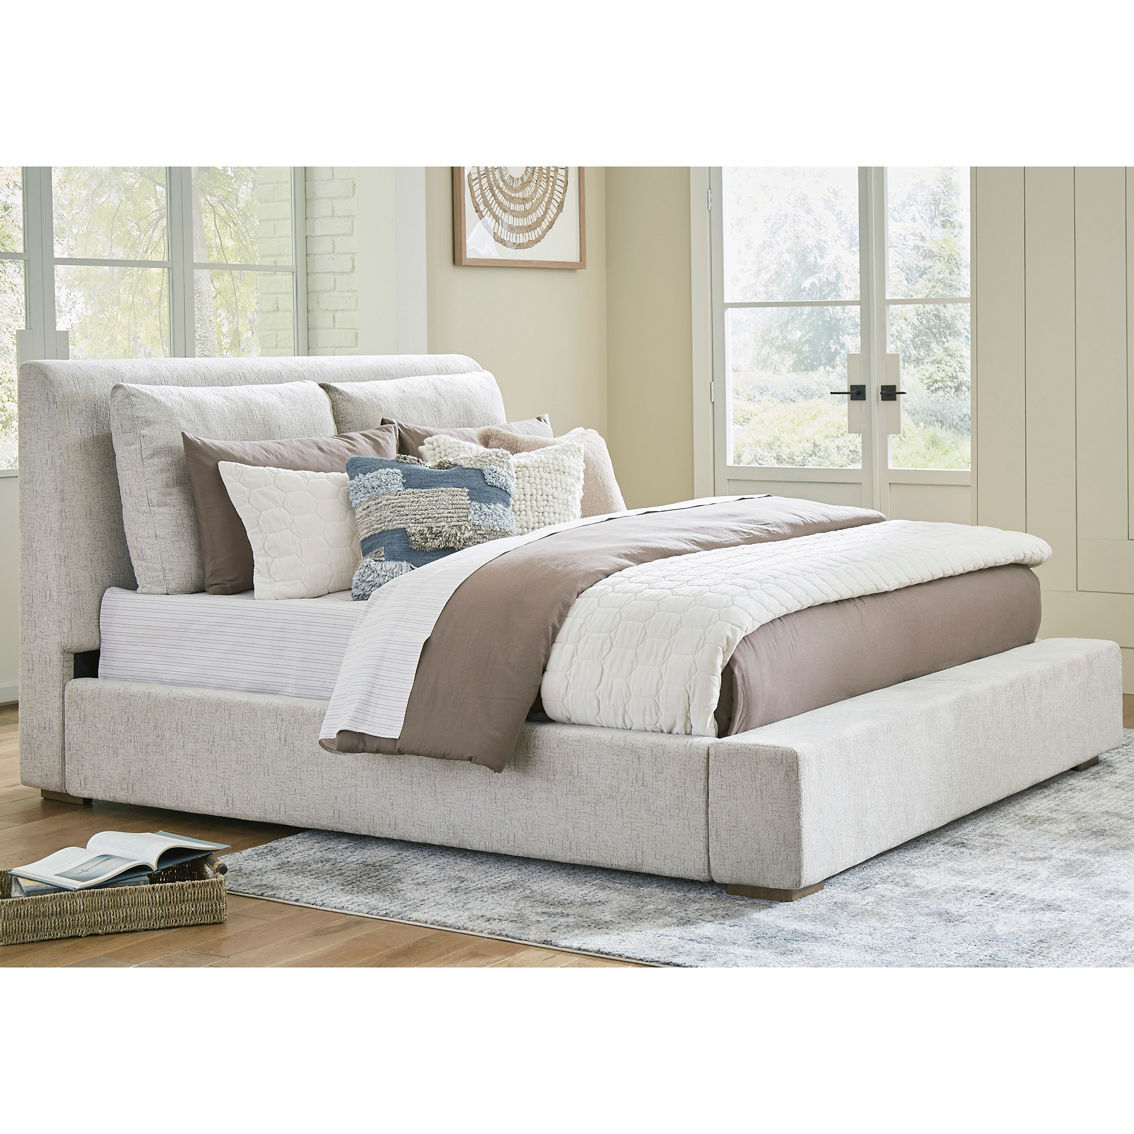 Millennium by Ashley Cabalynn 5 pc. Upholstered Bedroom Set - Image 2 of 8